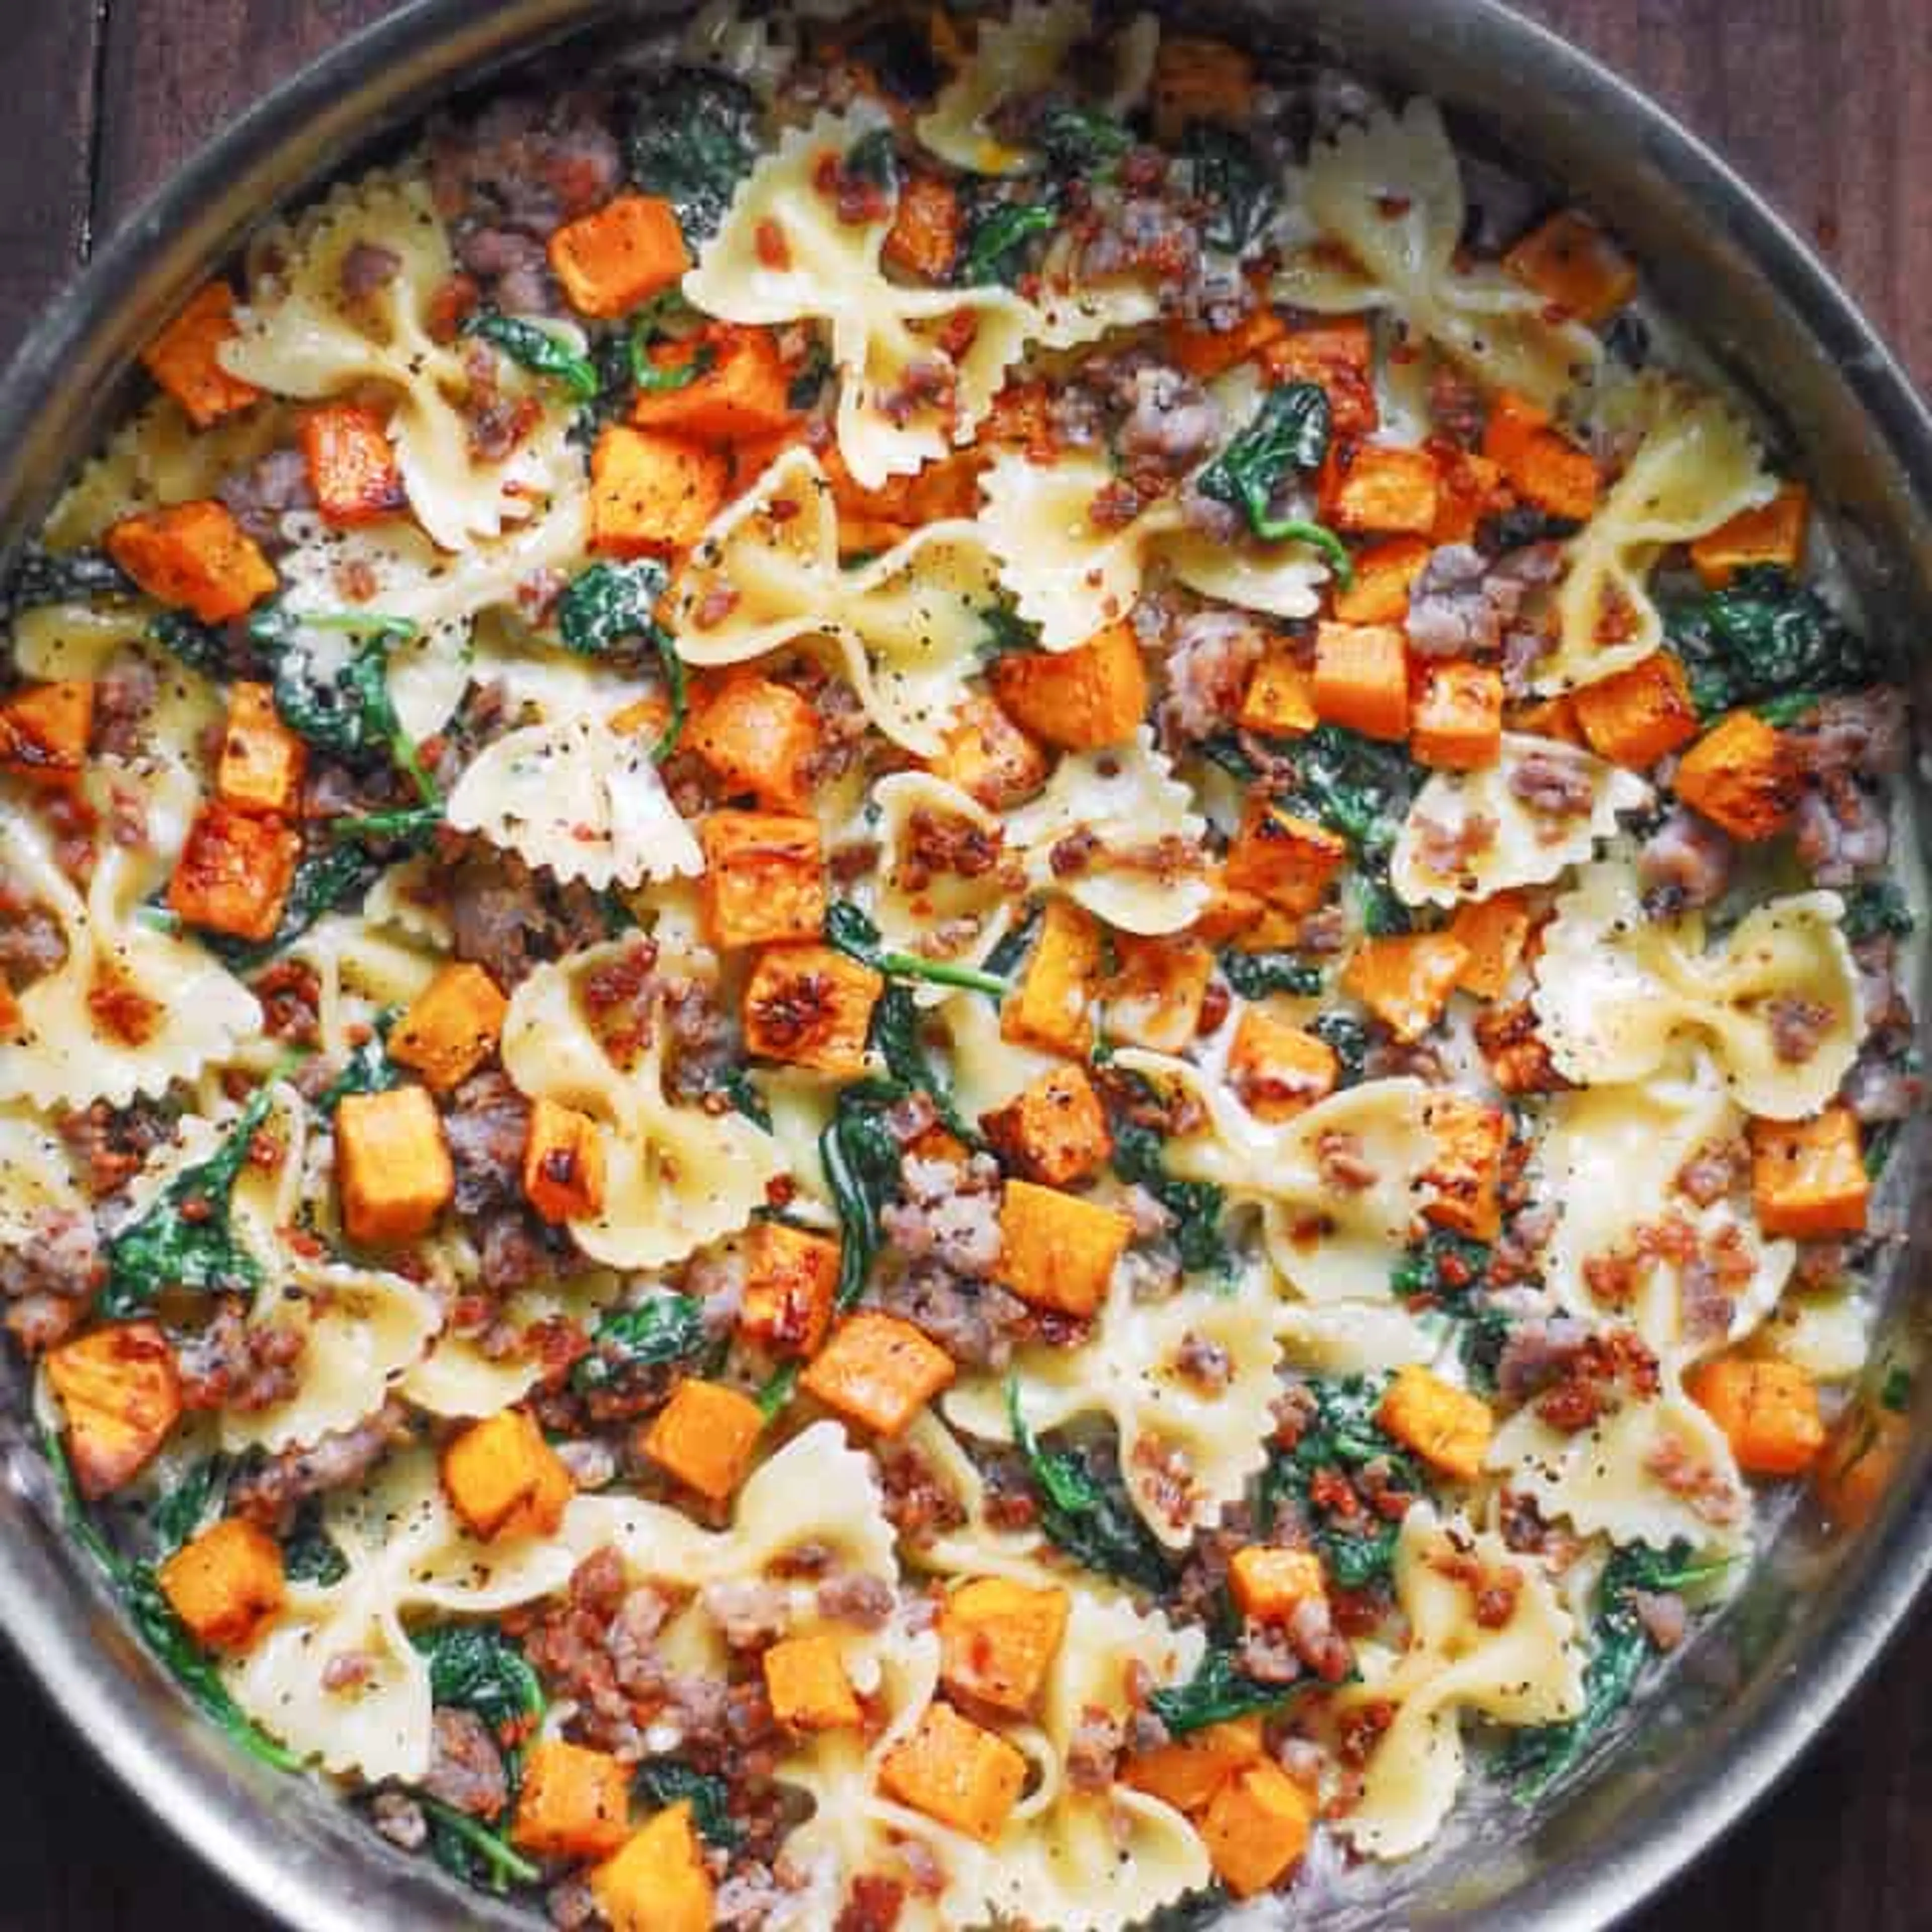 Creamy Roasted Butternut Squash Pasta with Sausage and Spina